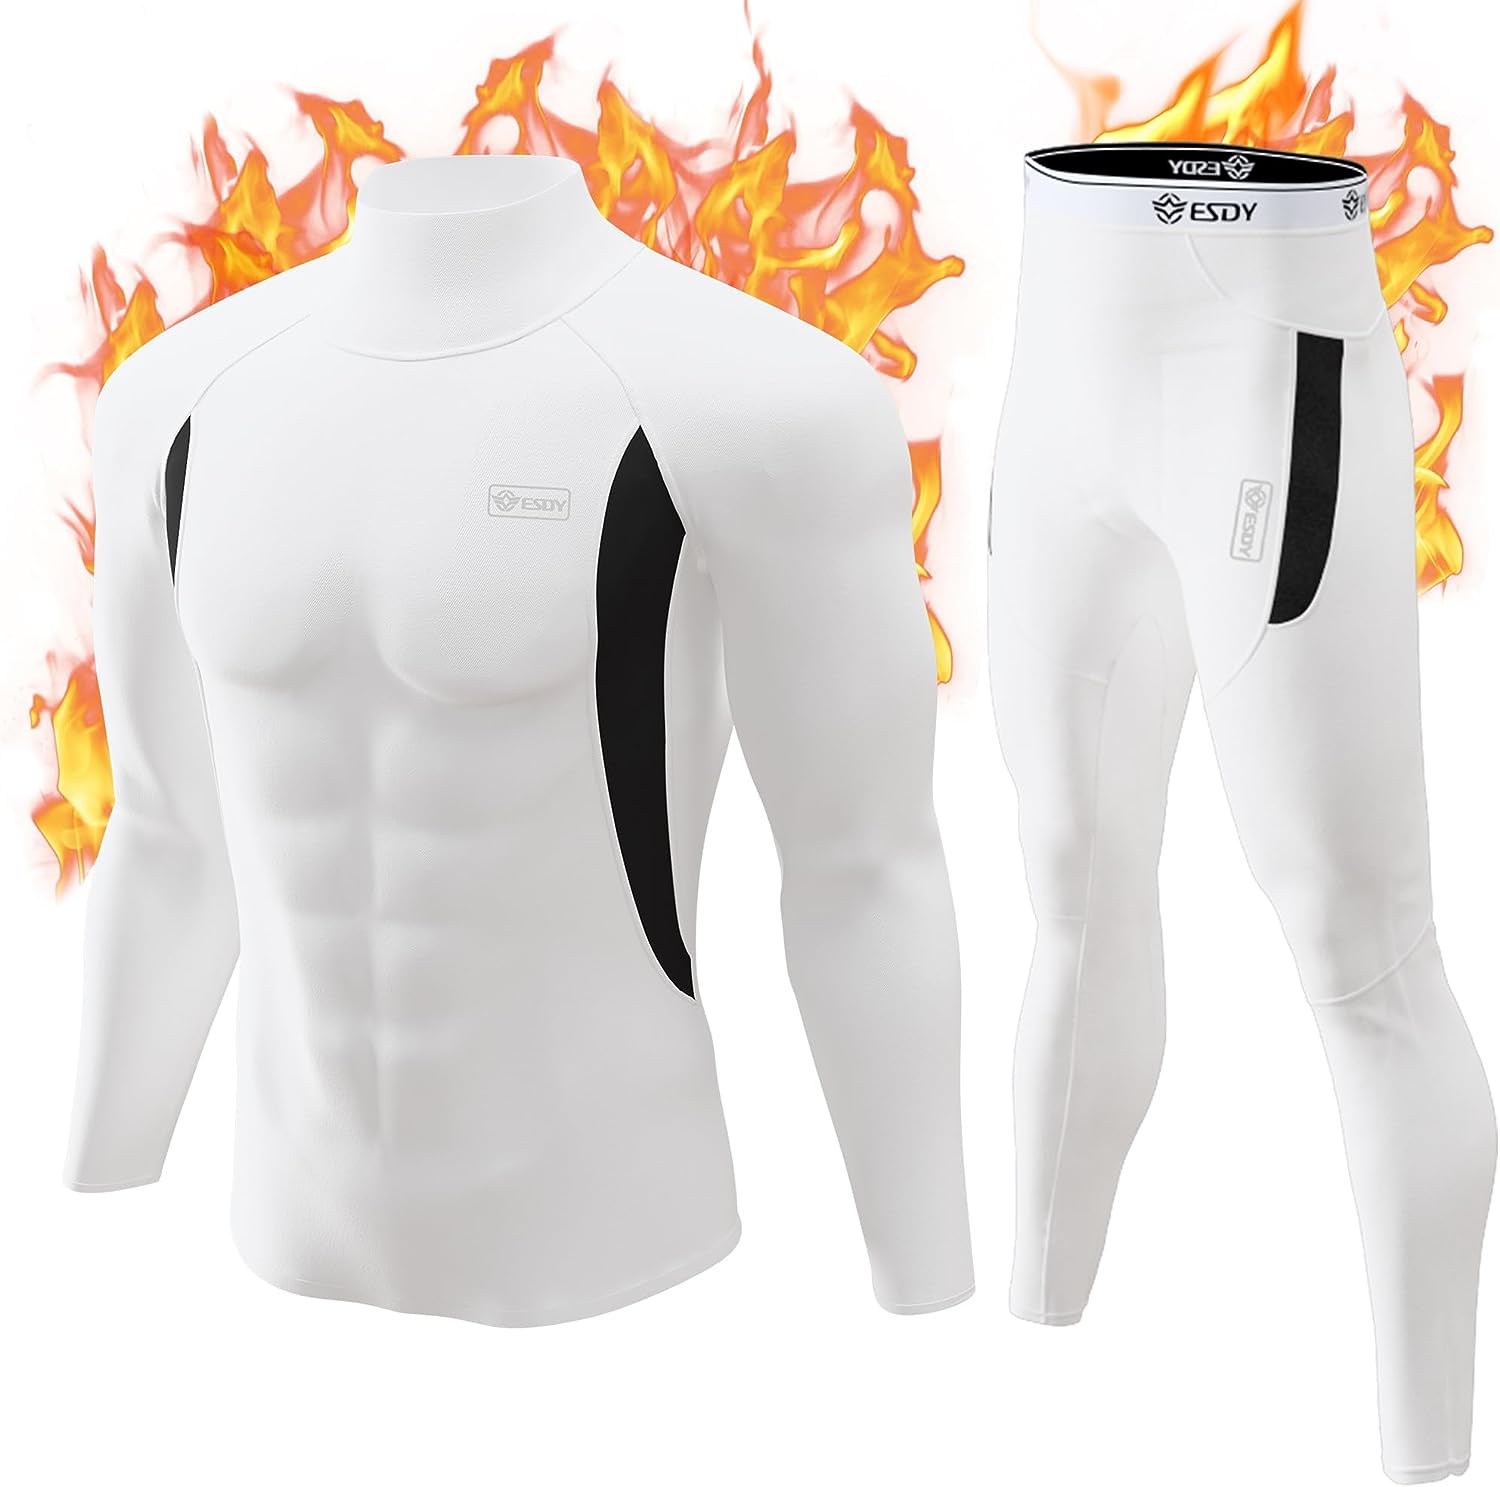 Buy CL Thermal Underwear Long Johns Set Mens Winter Hunting Gear Sport Base  Layer Bottom Top XS-4XL, Crew Neck-black, Large at